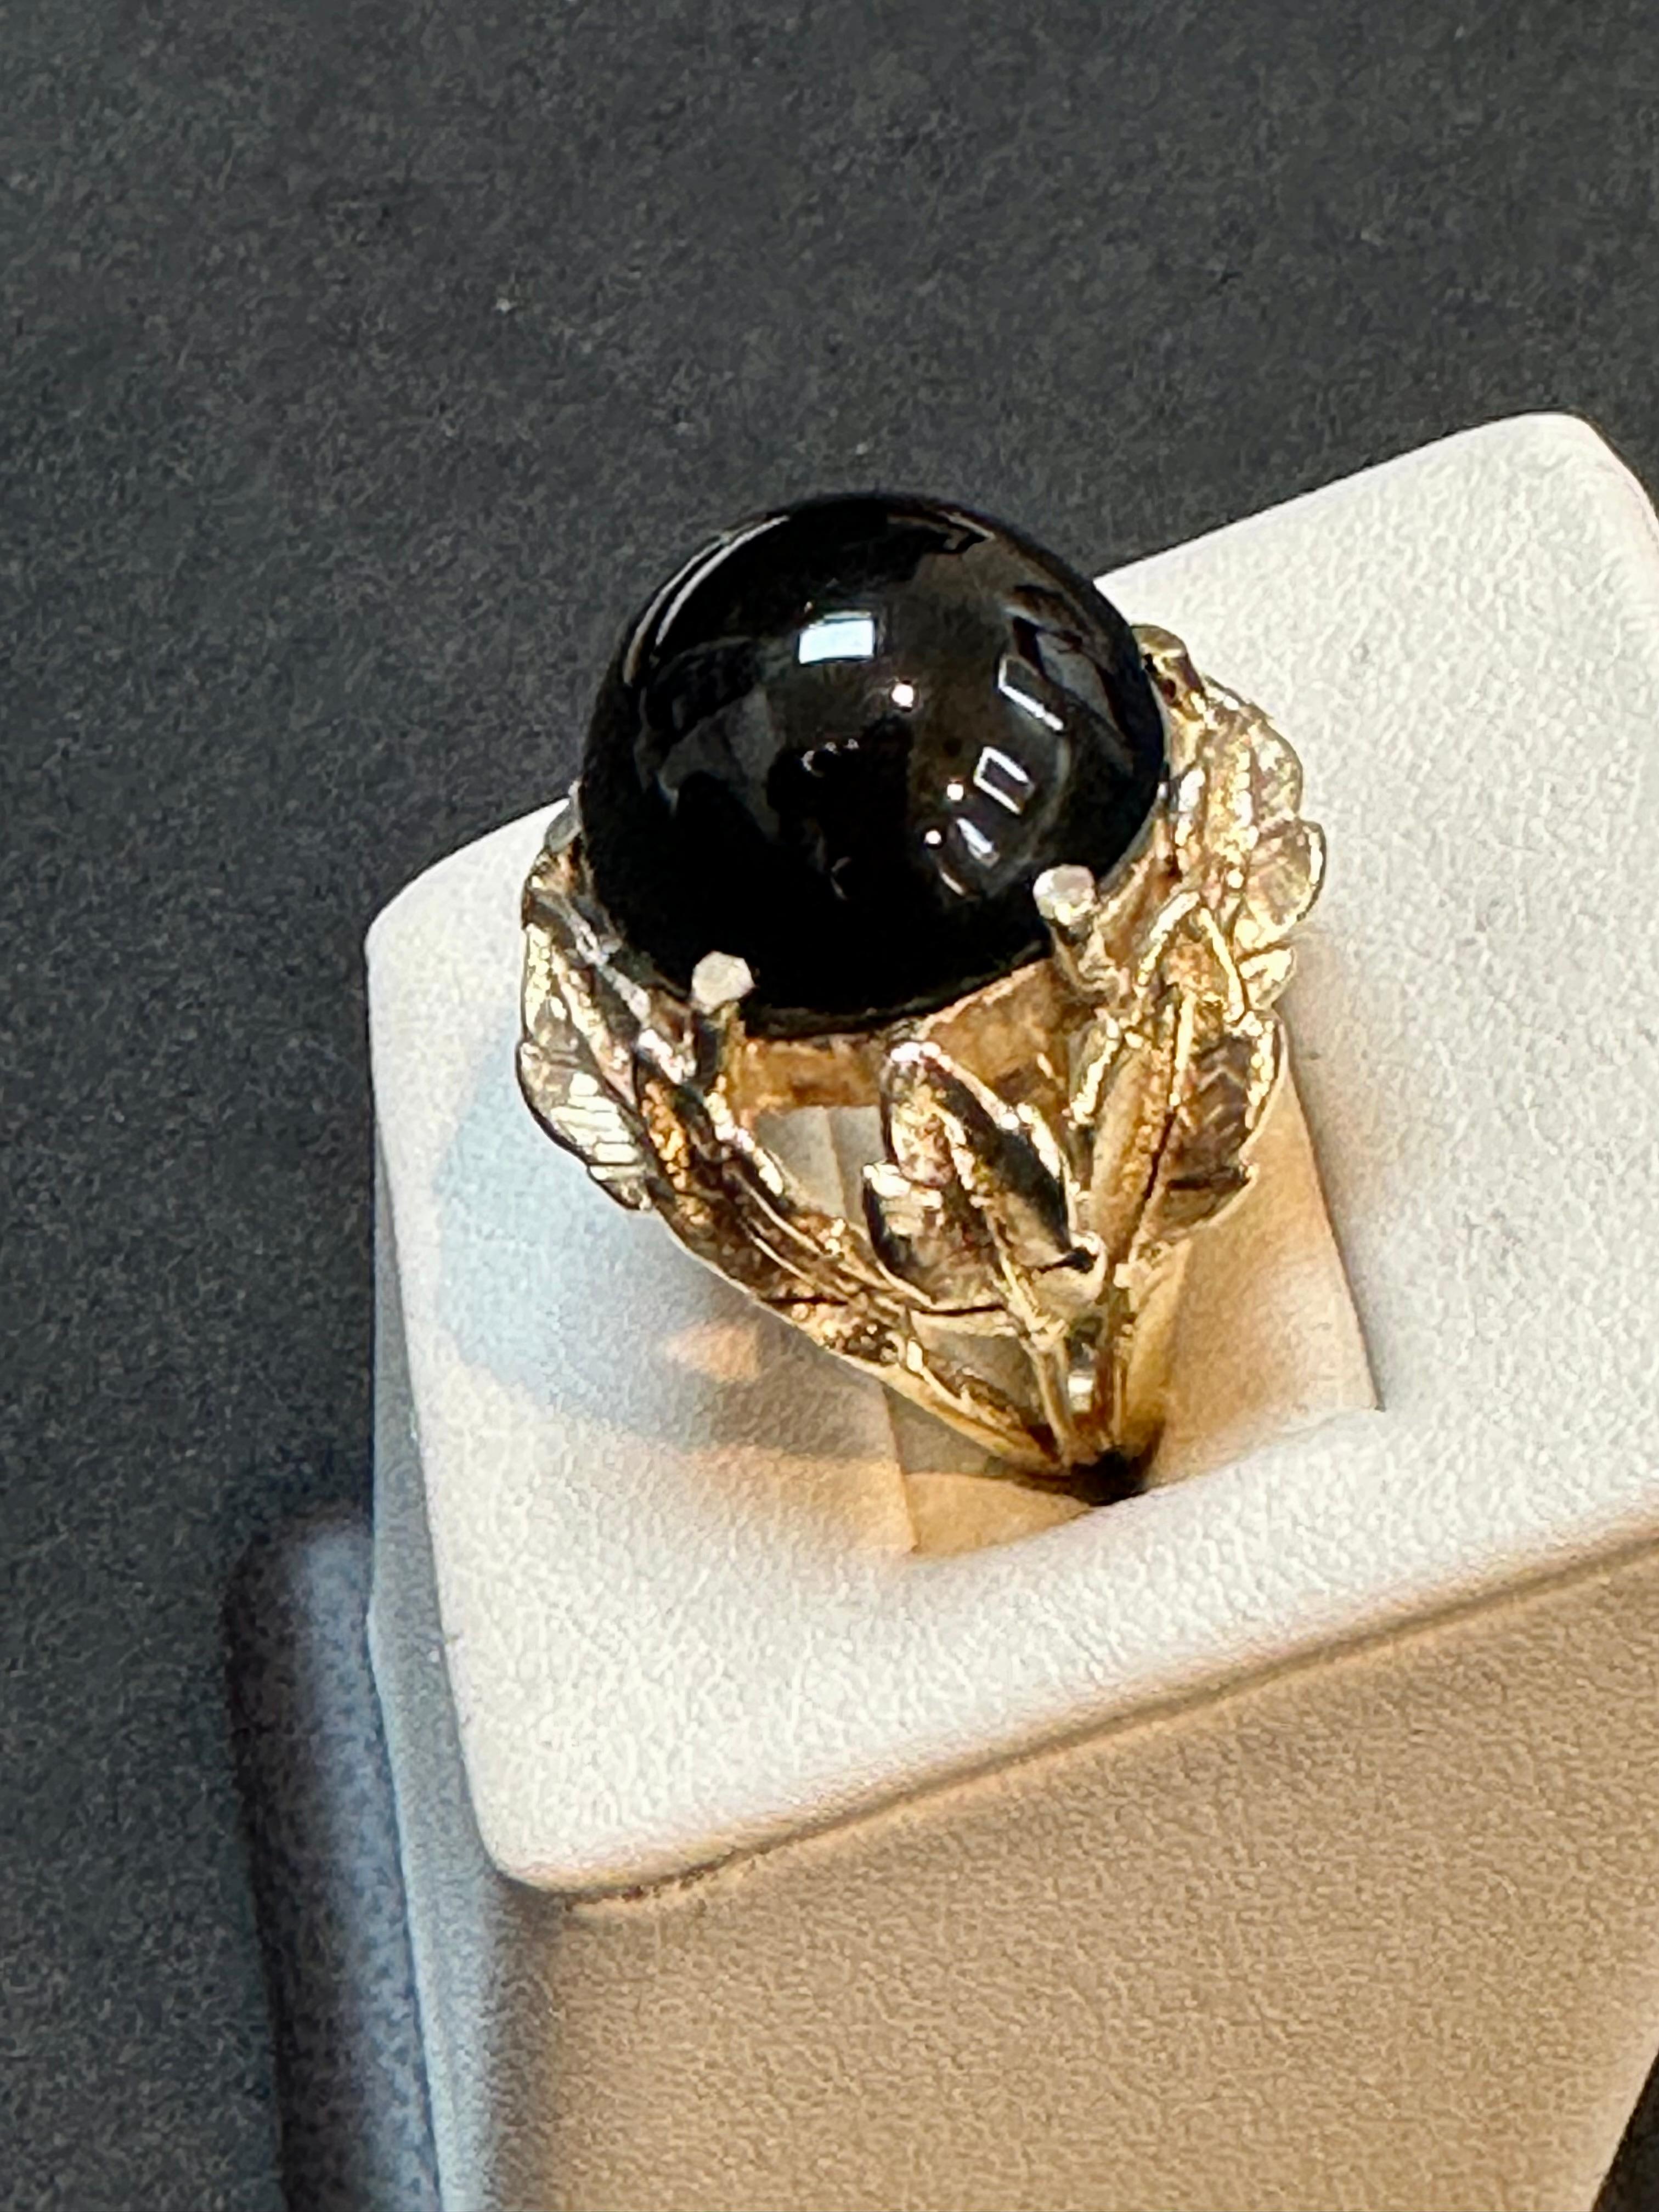 10 Carat Round Black Onyx Unisex Ring 14 Karat Yellow Gold Size 5.75 In Excellent Condition For Sale In New York, NY